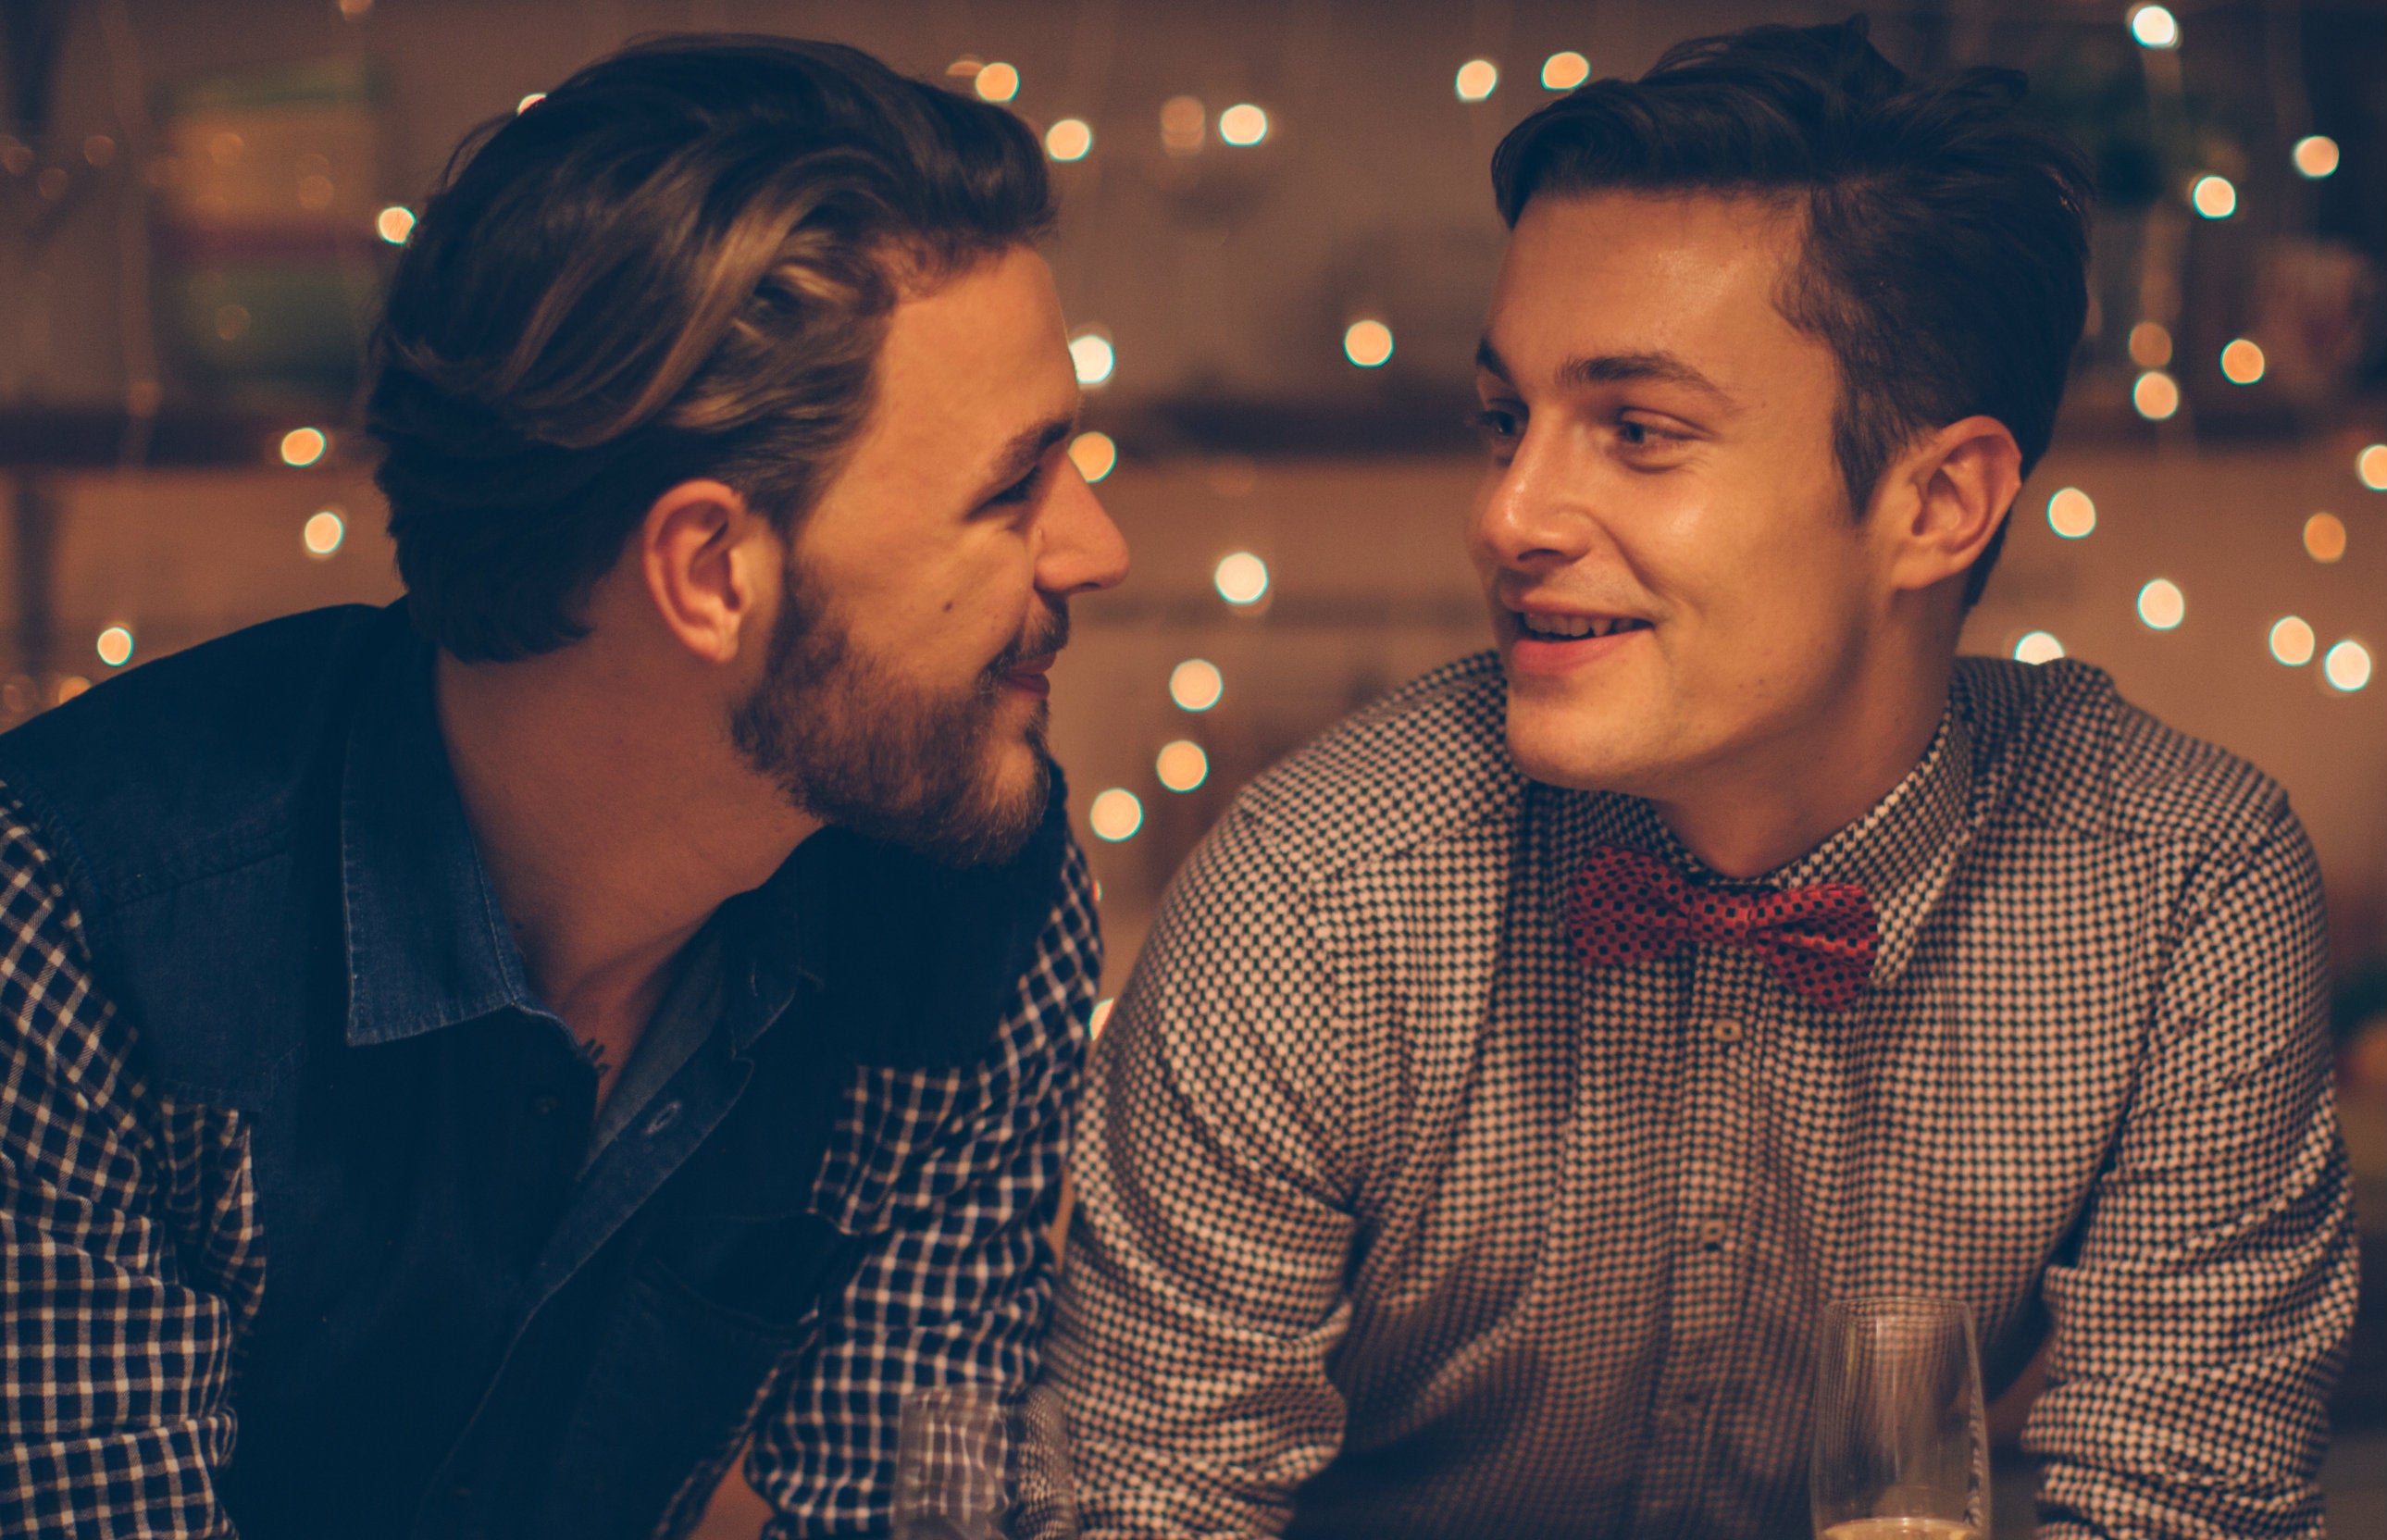 Here's what same-sex couples need to know about financial planning.